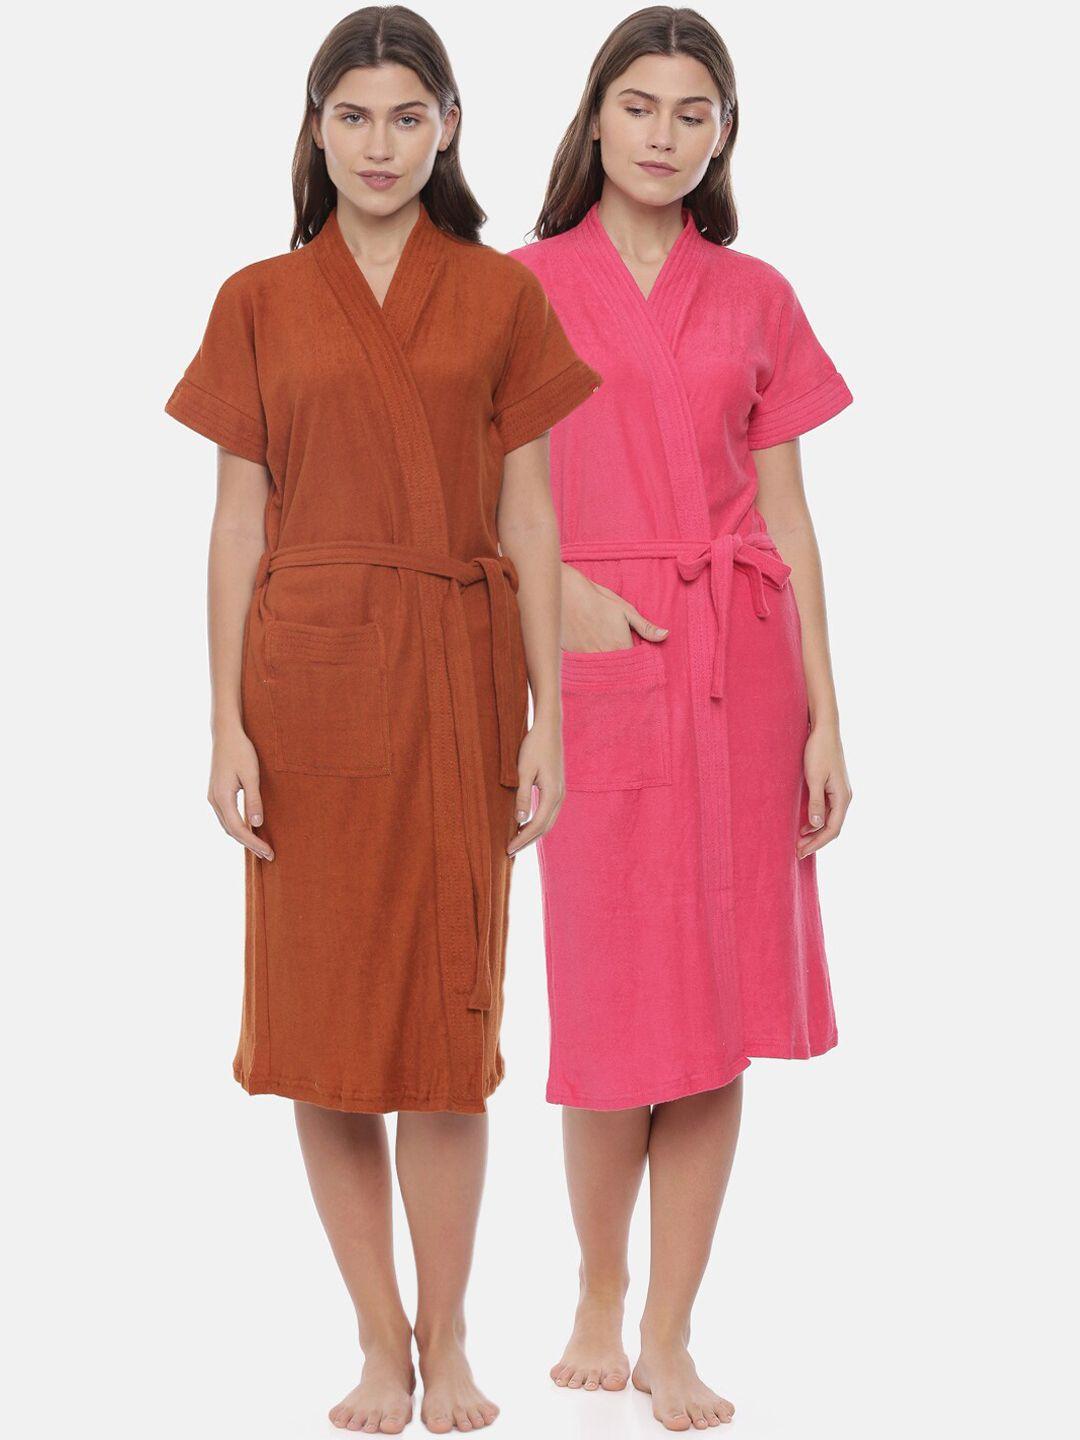 goldstroms women pack of 2 fuchsia pink & brown solid cotton bath robes